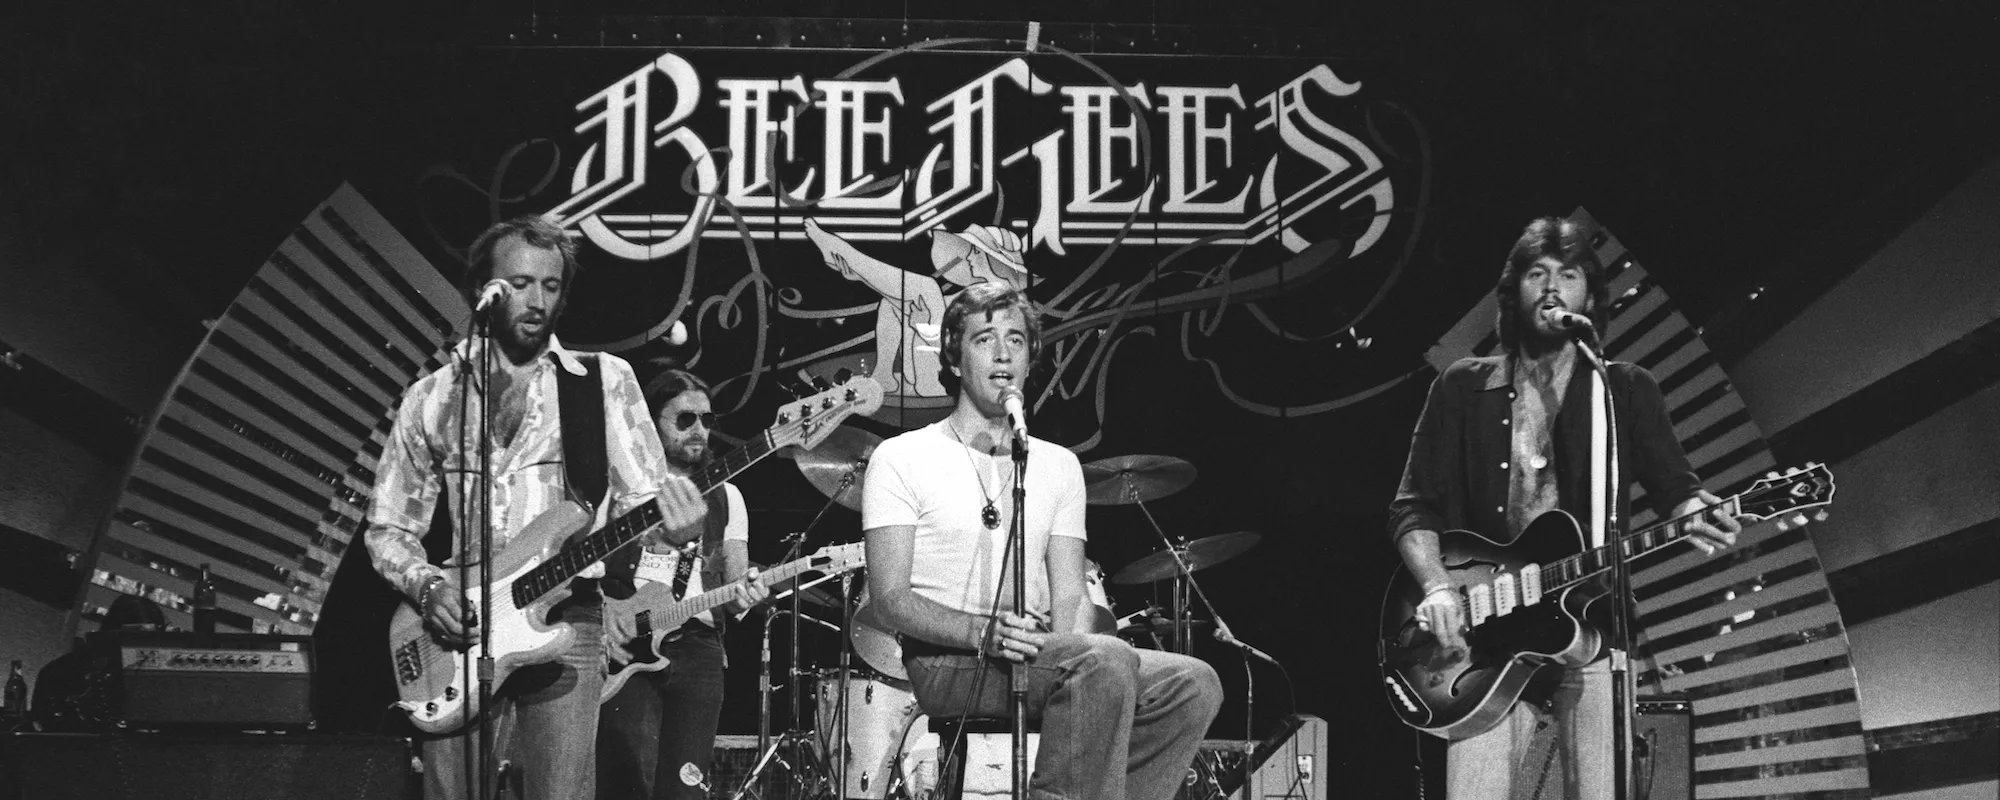 Ridley Scott Set to Direct Bee Gees Biopic with Barry Gibb as Executive Producer